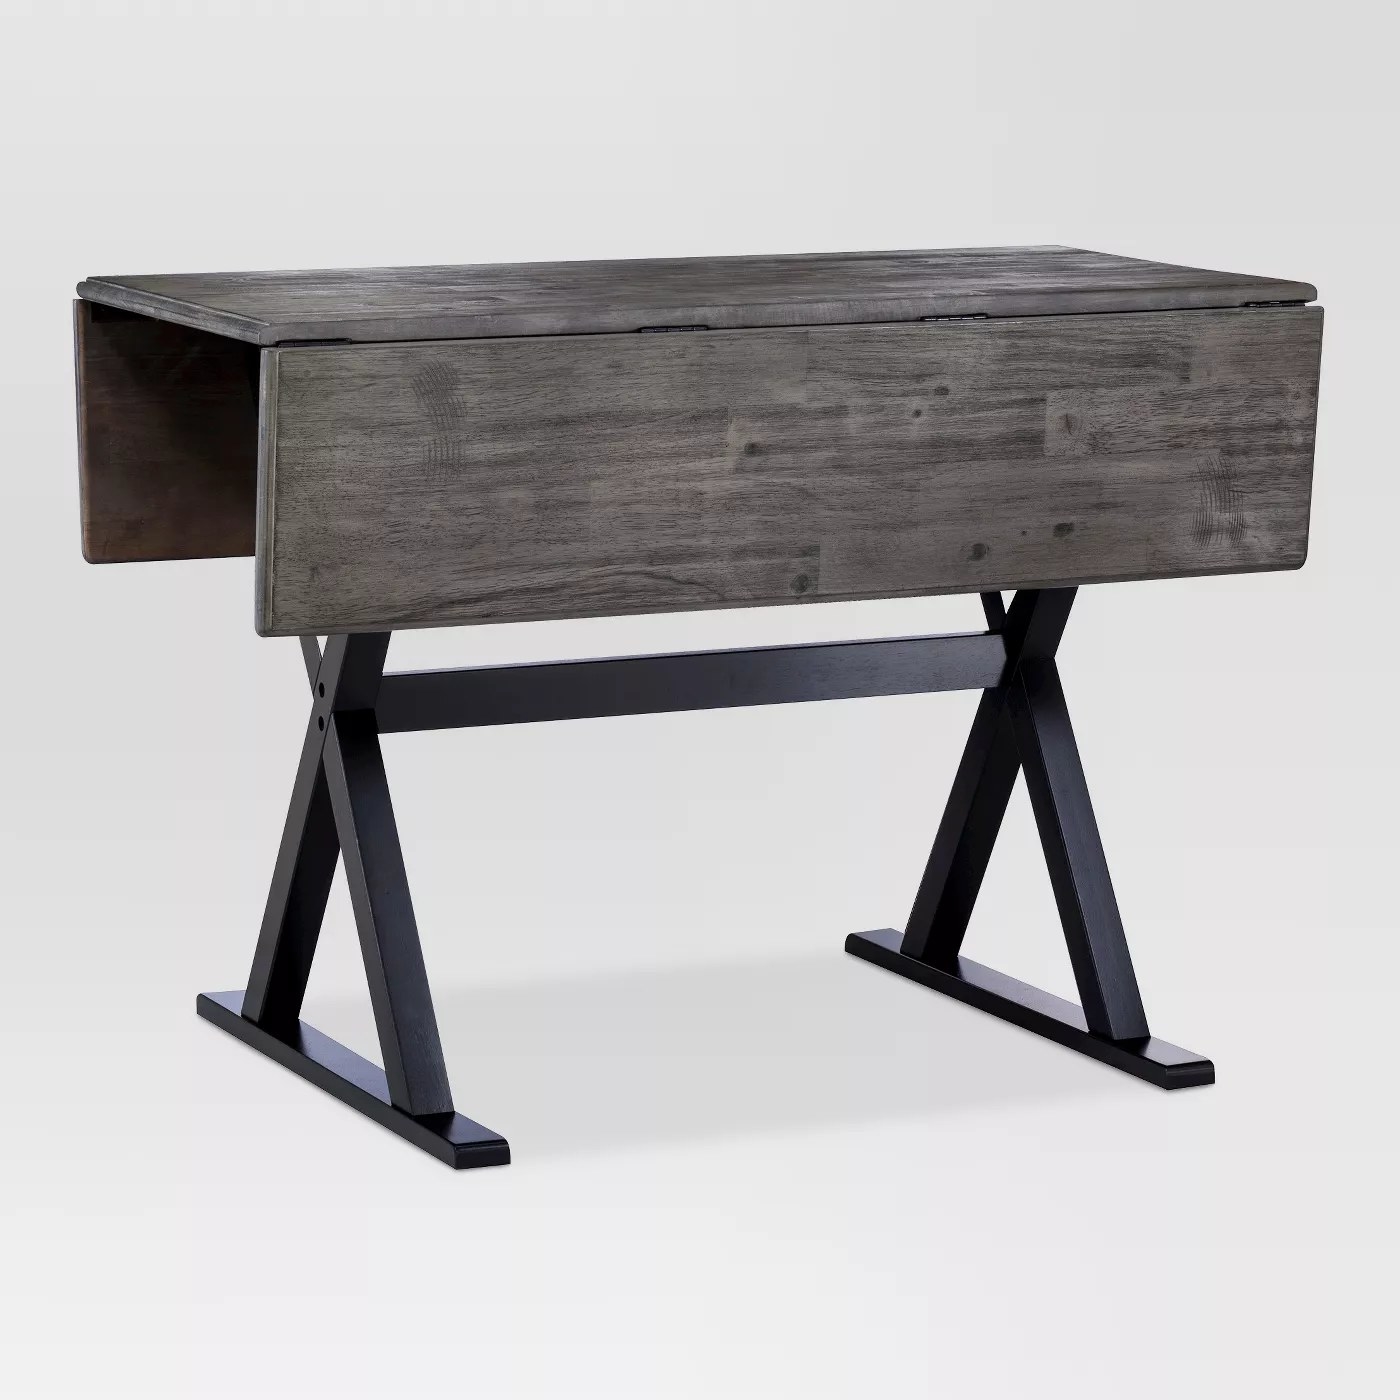 The gray wooden table with metal legs